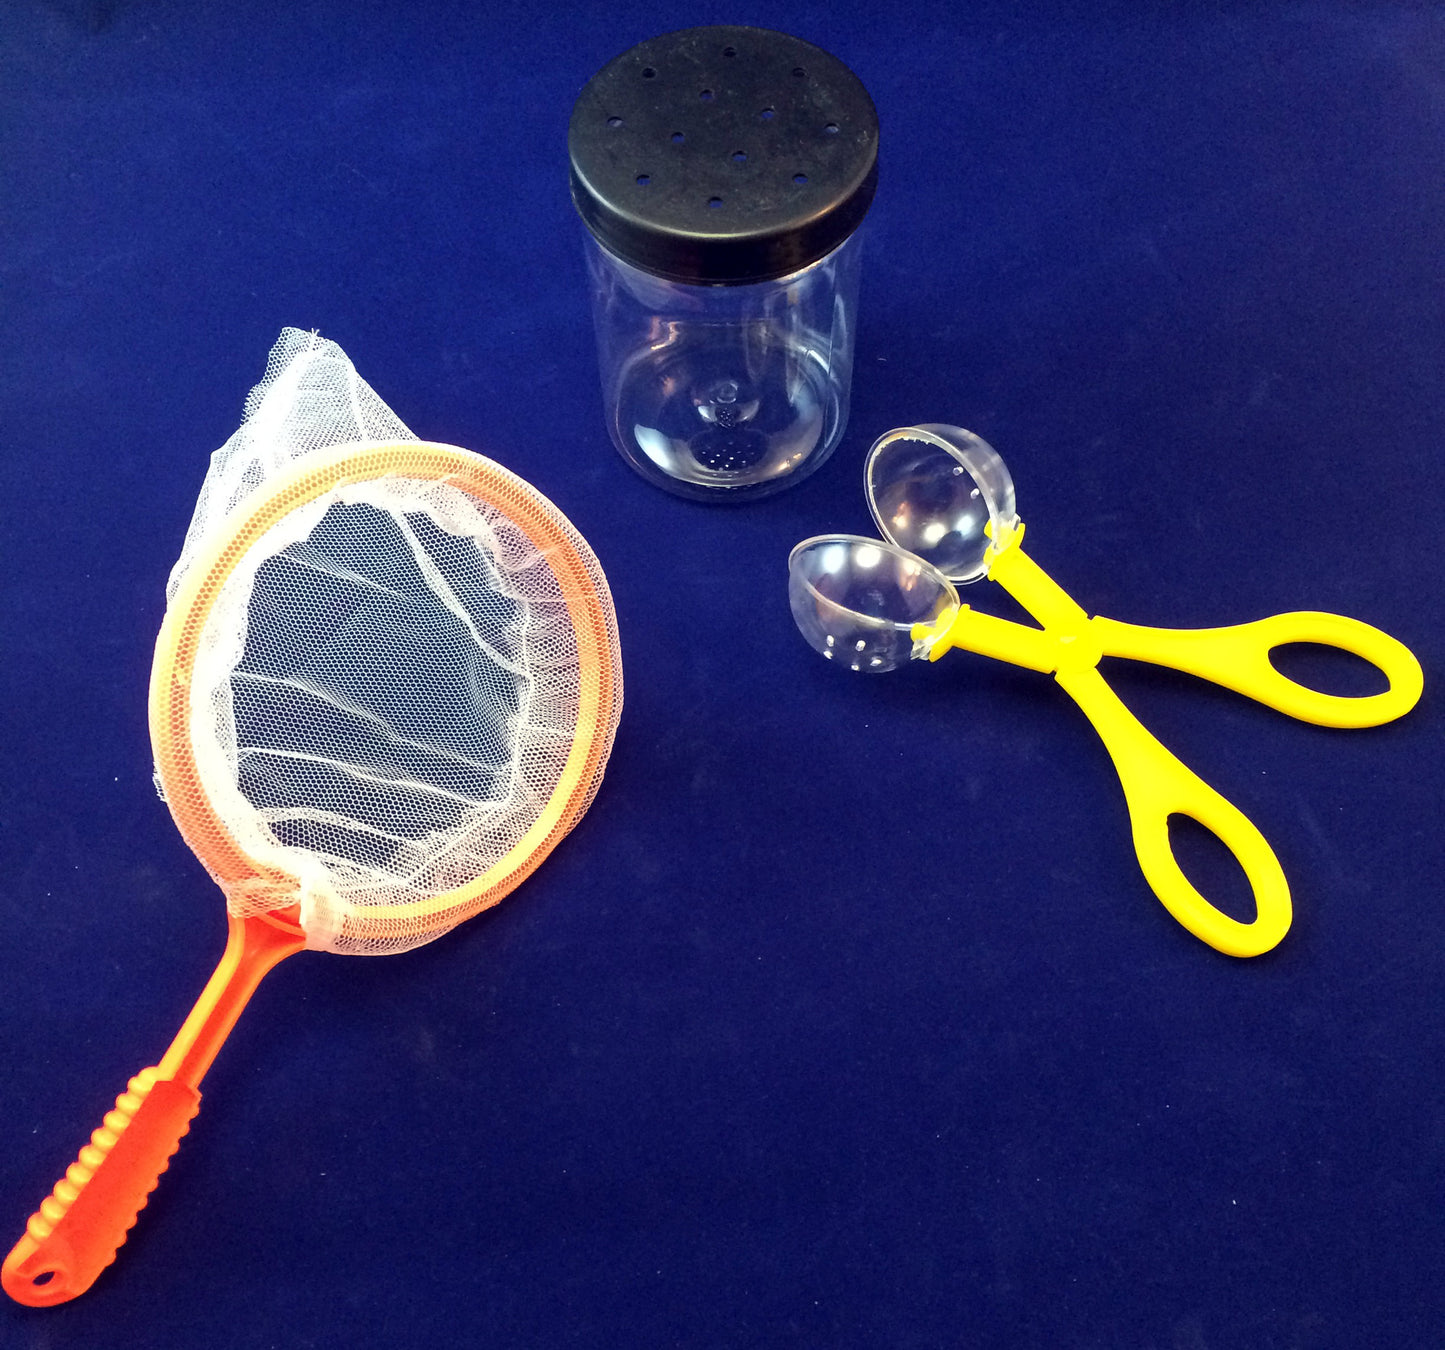 Science Activity - Catch Fireflies Inspired by The Very Lonely Firefly by Eric Carle